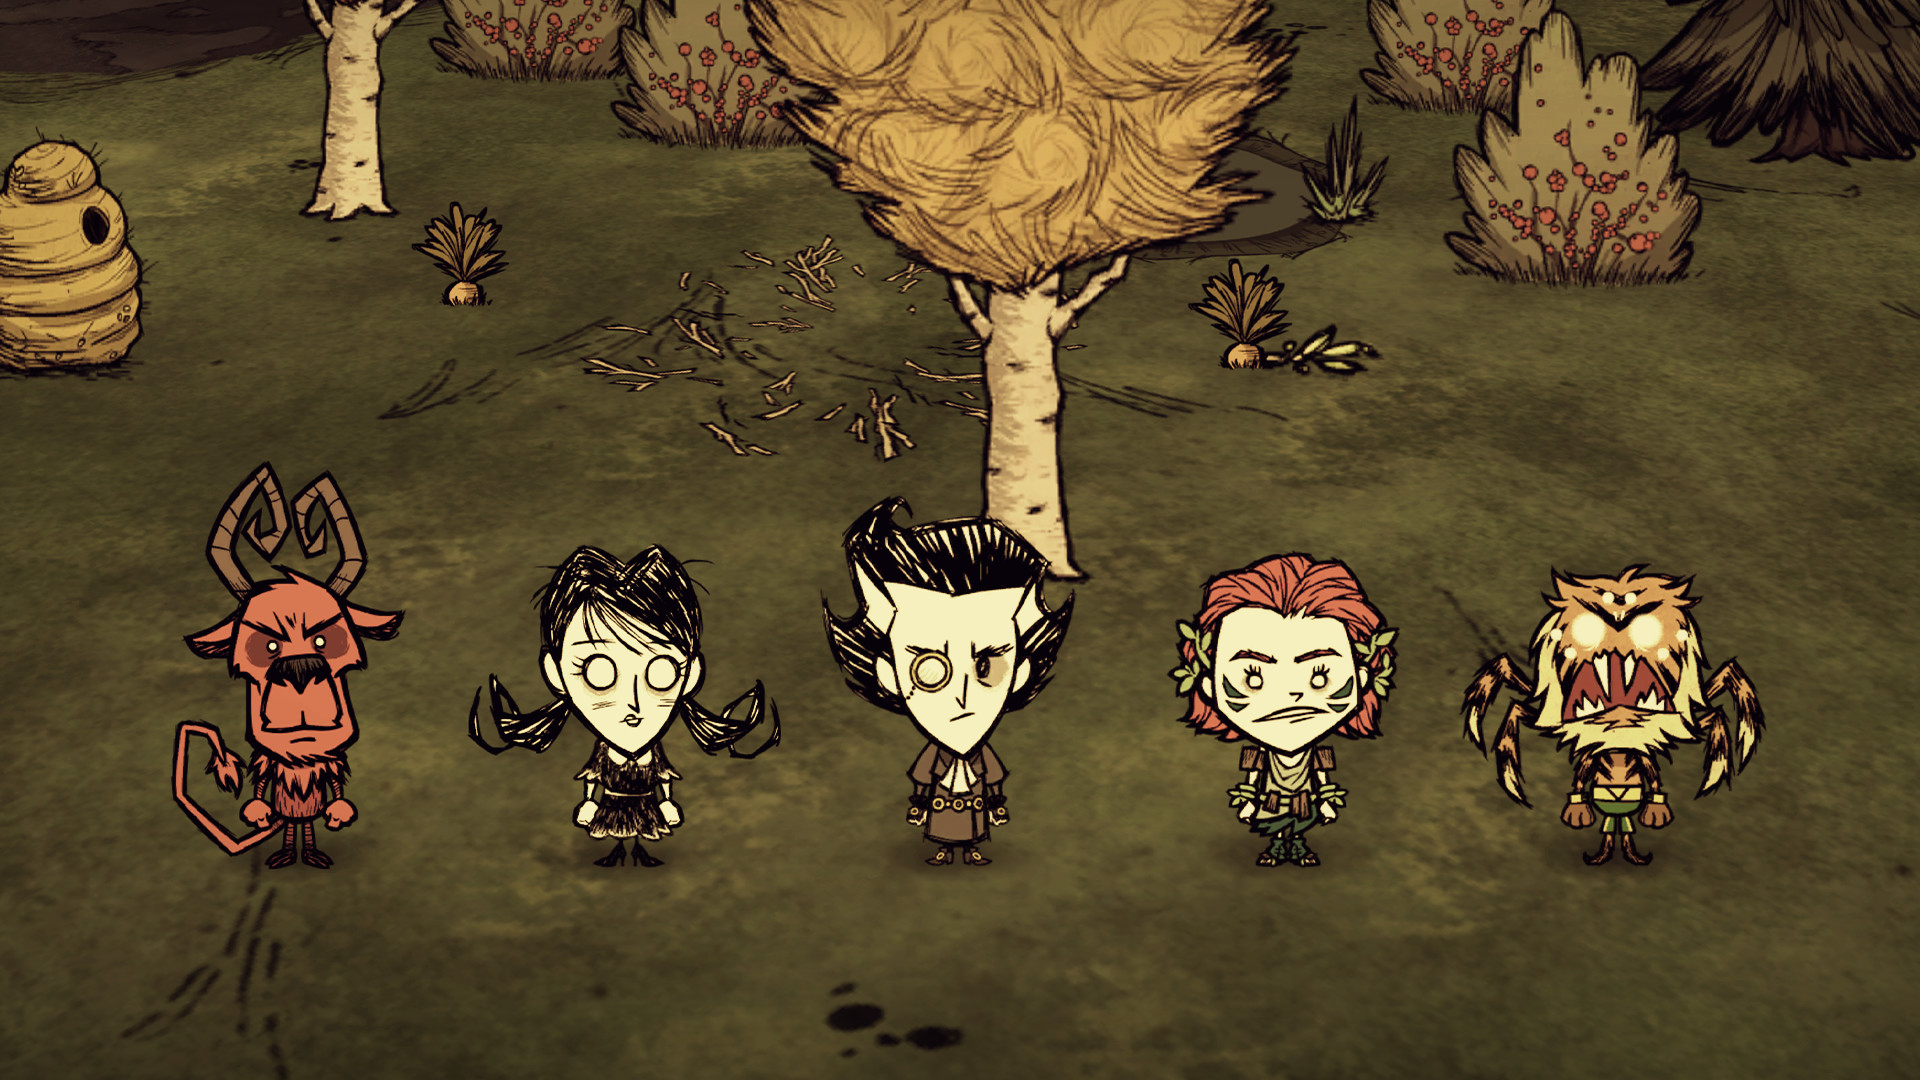 Don t start new. Don t Starve игра. Don't Starve Mega Pack 2020. Don старв together. Don't Starve together ава.